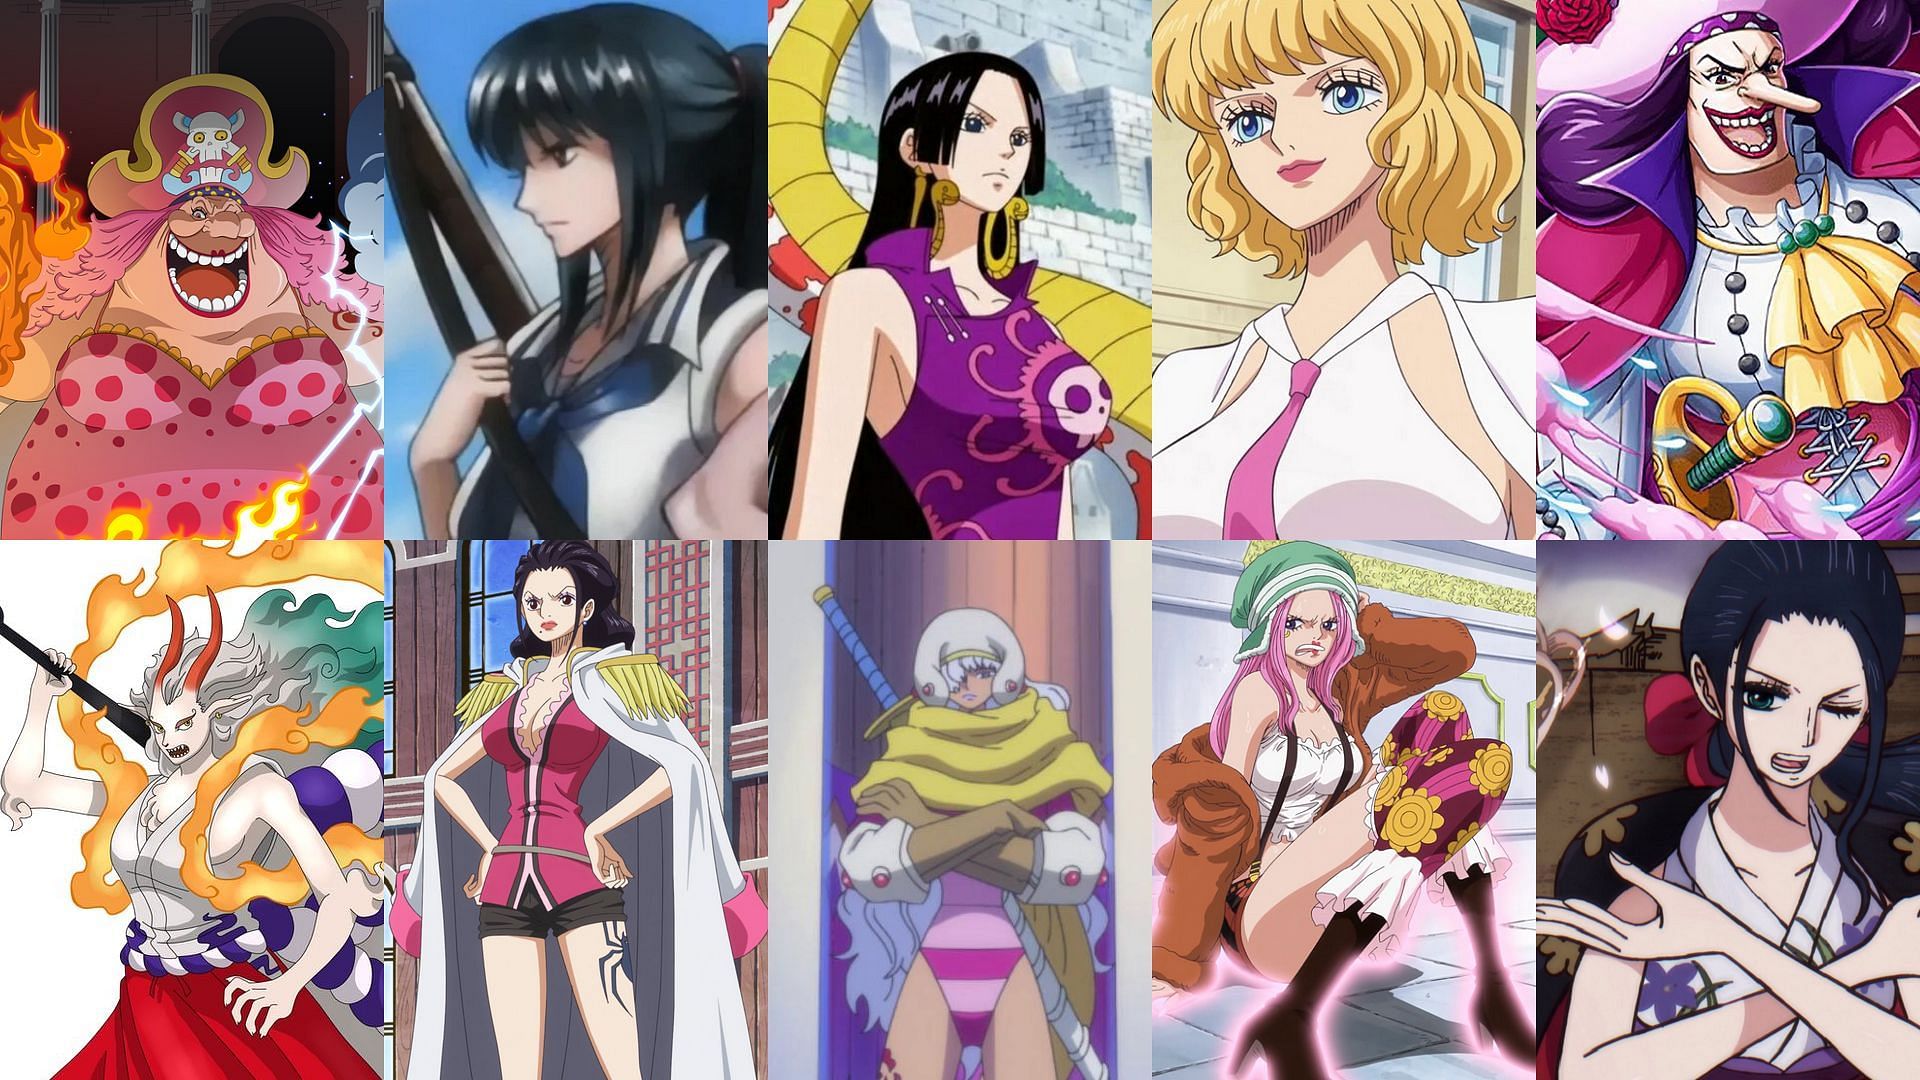 The 15 strongest women in One Piece as of 2023, ranked